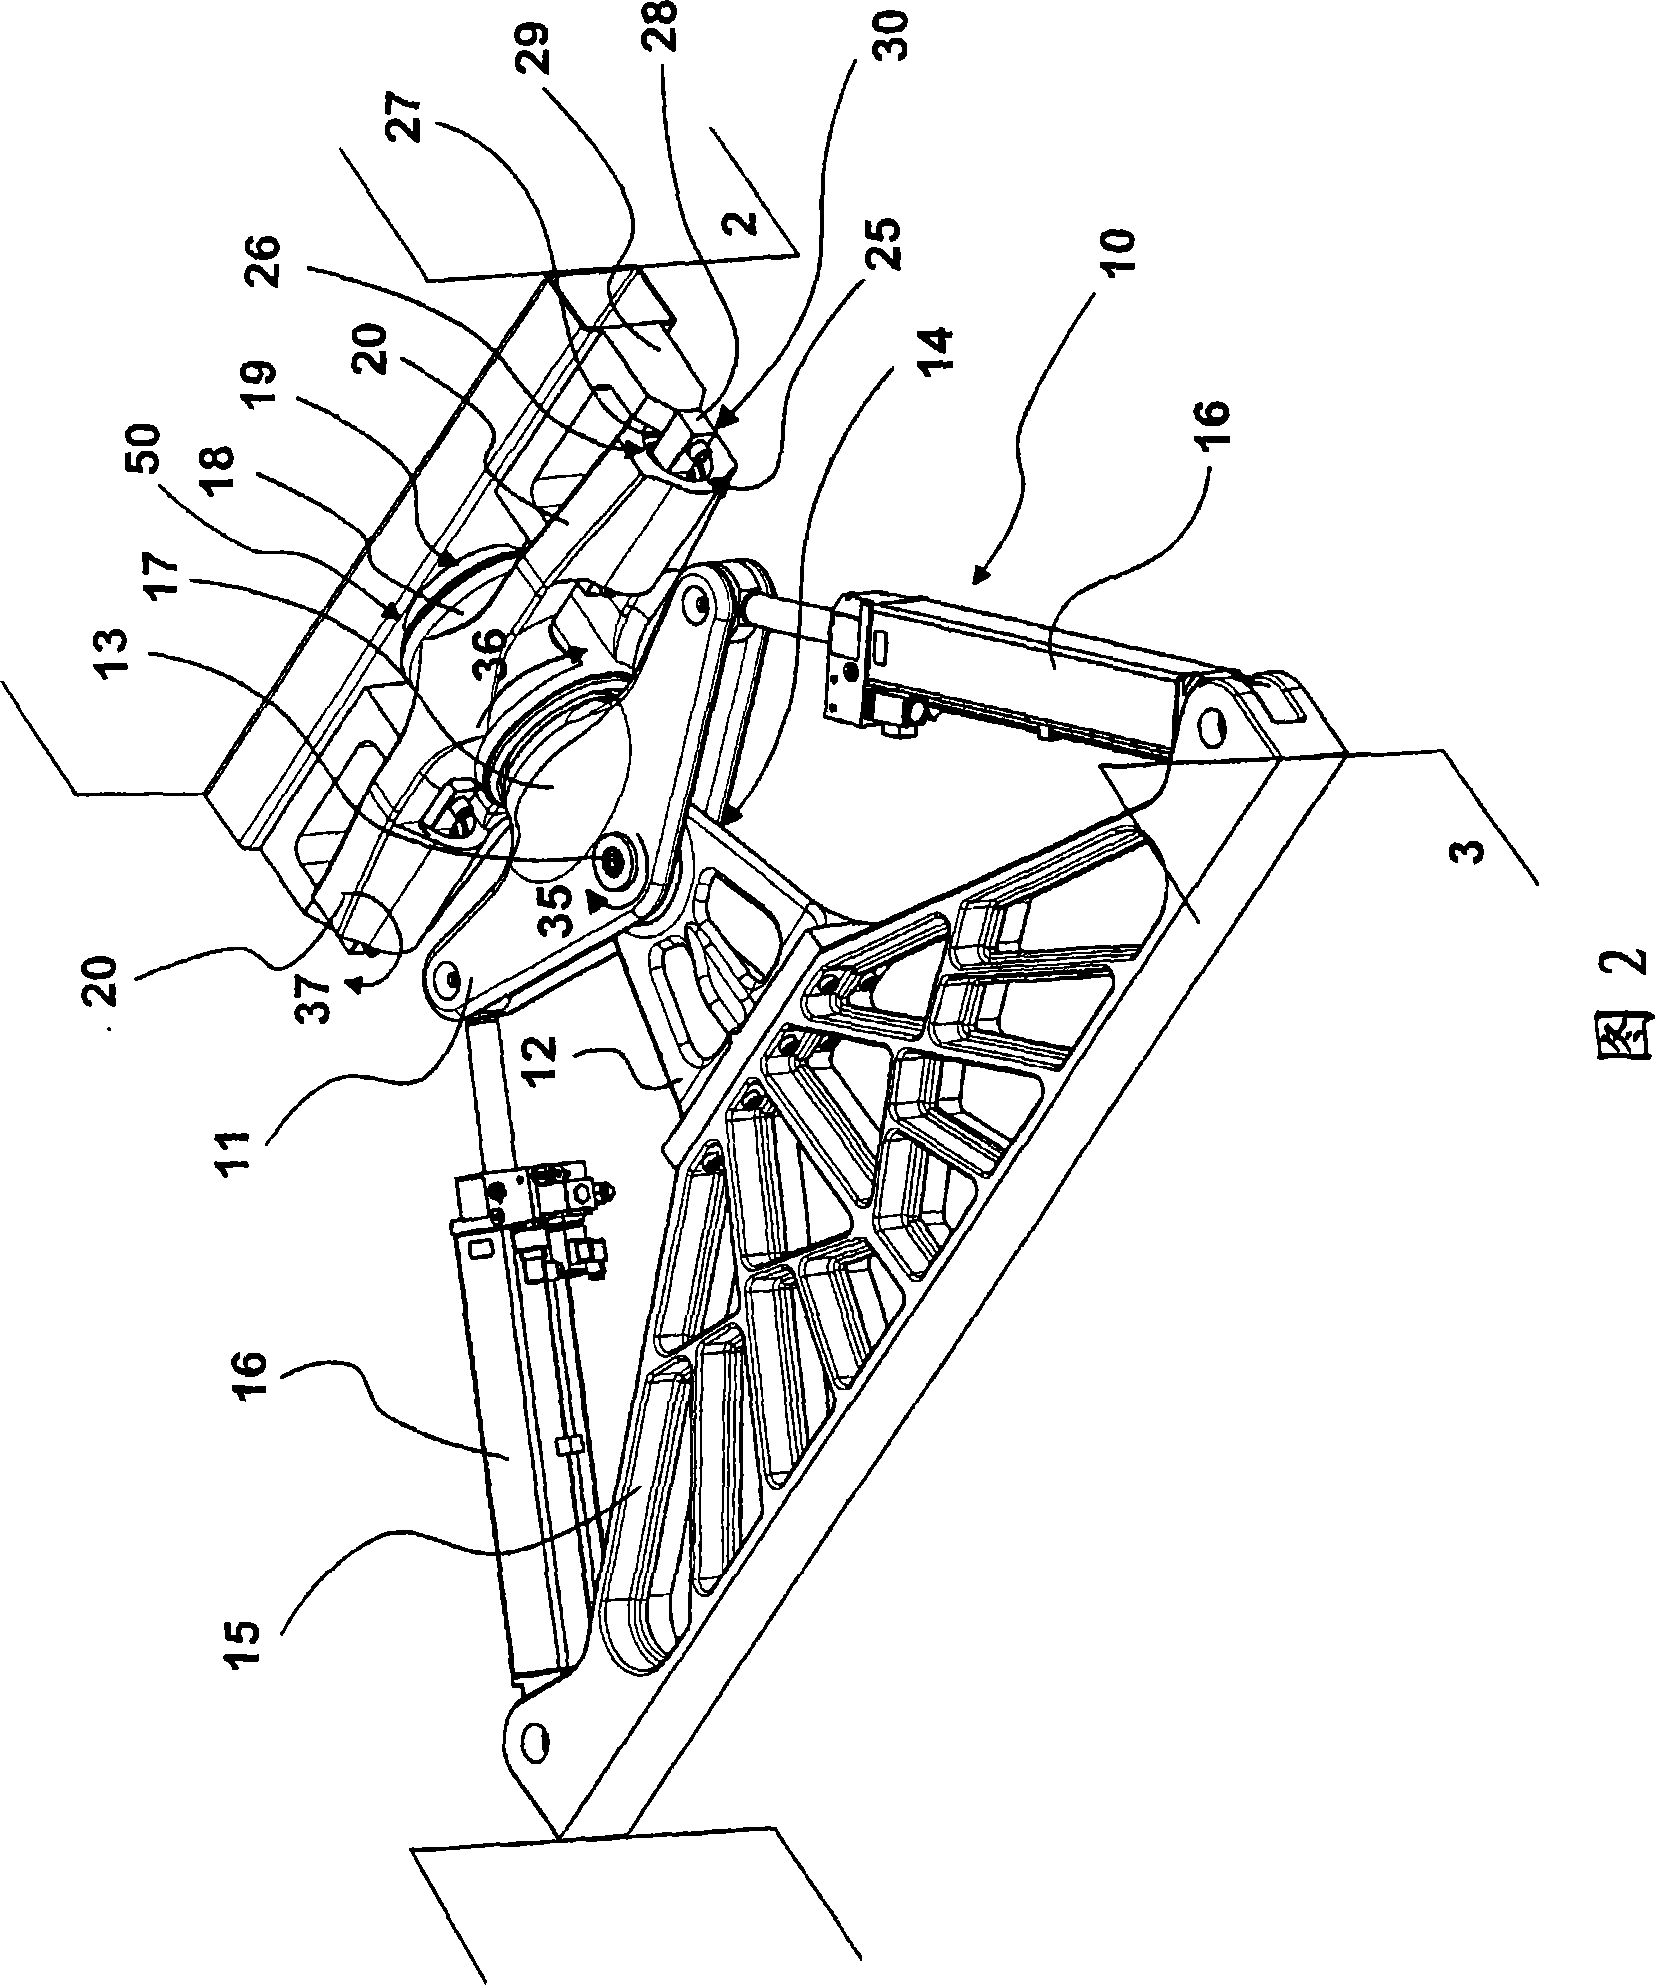 Coupling between two articulated vehicle parts, e.g. for an articulated vehicle